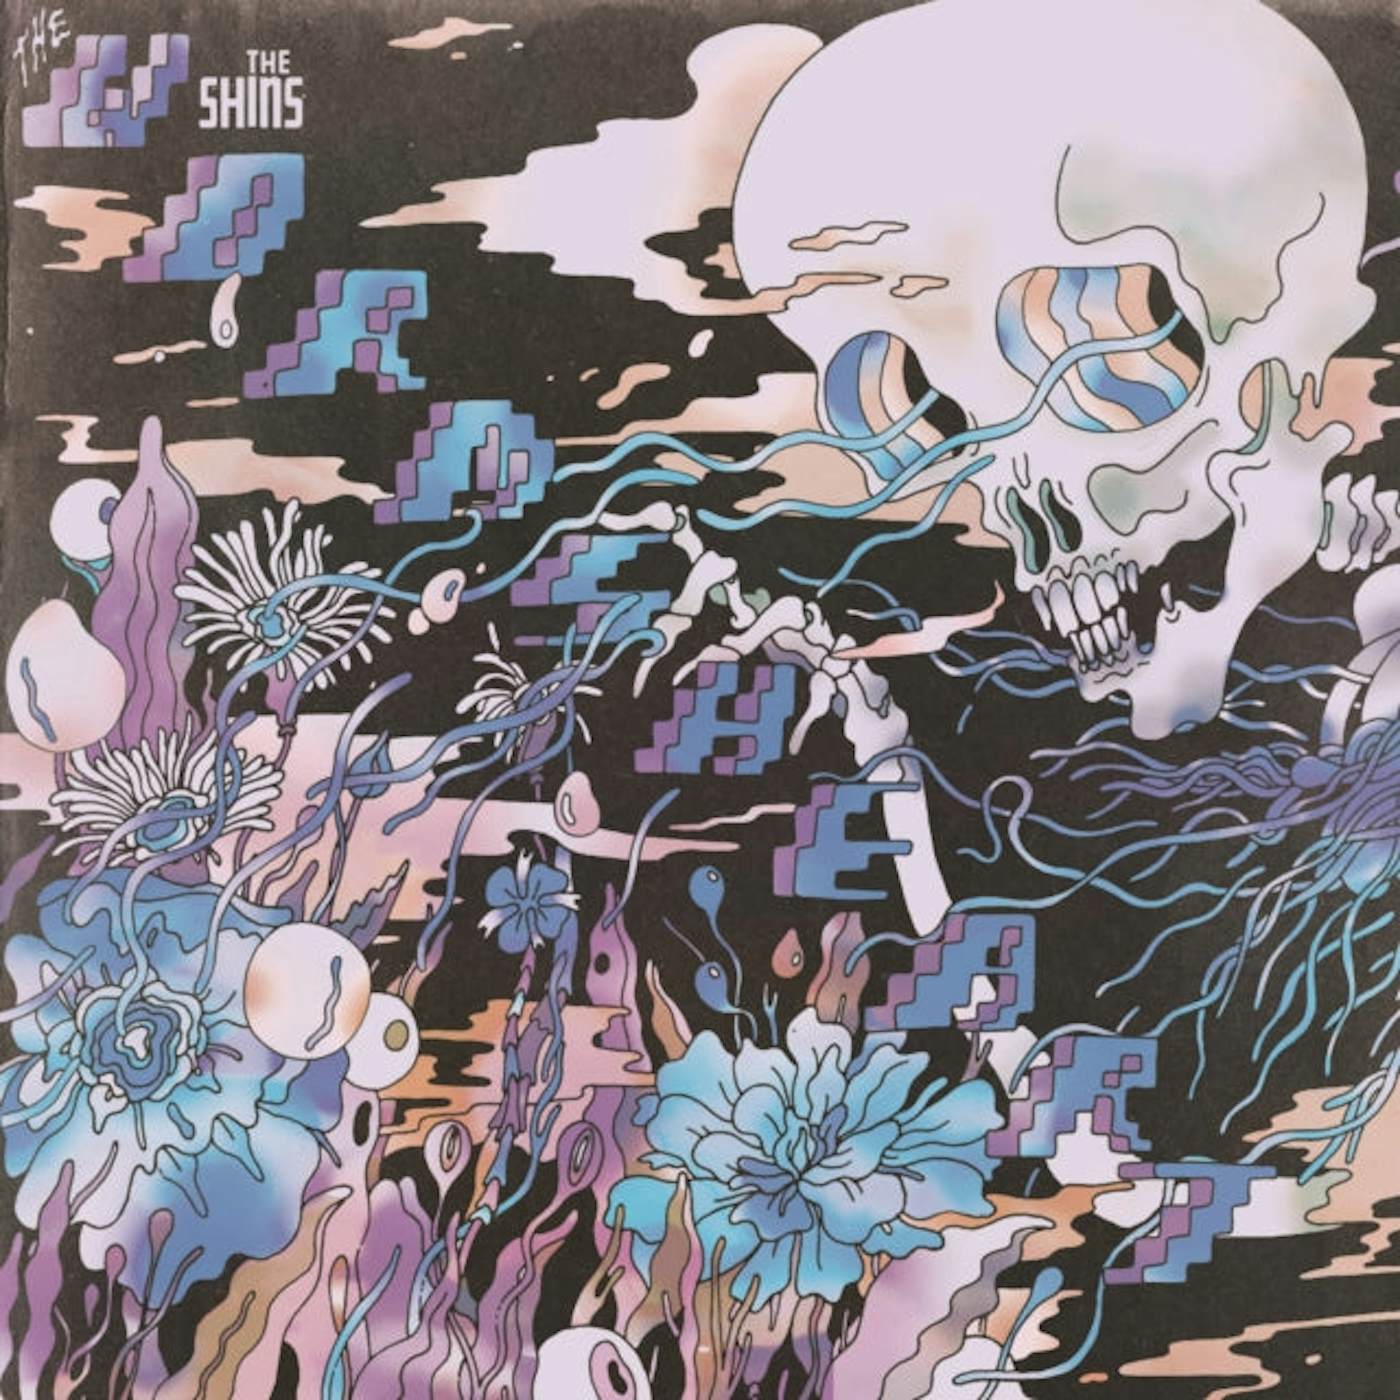 The Shins LP Vinyl Record - The Worms Heart